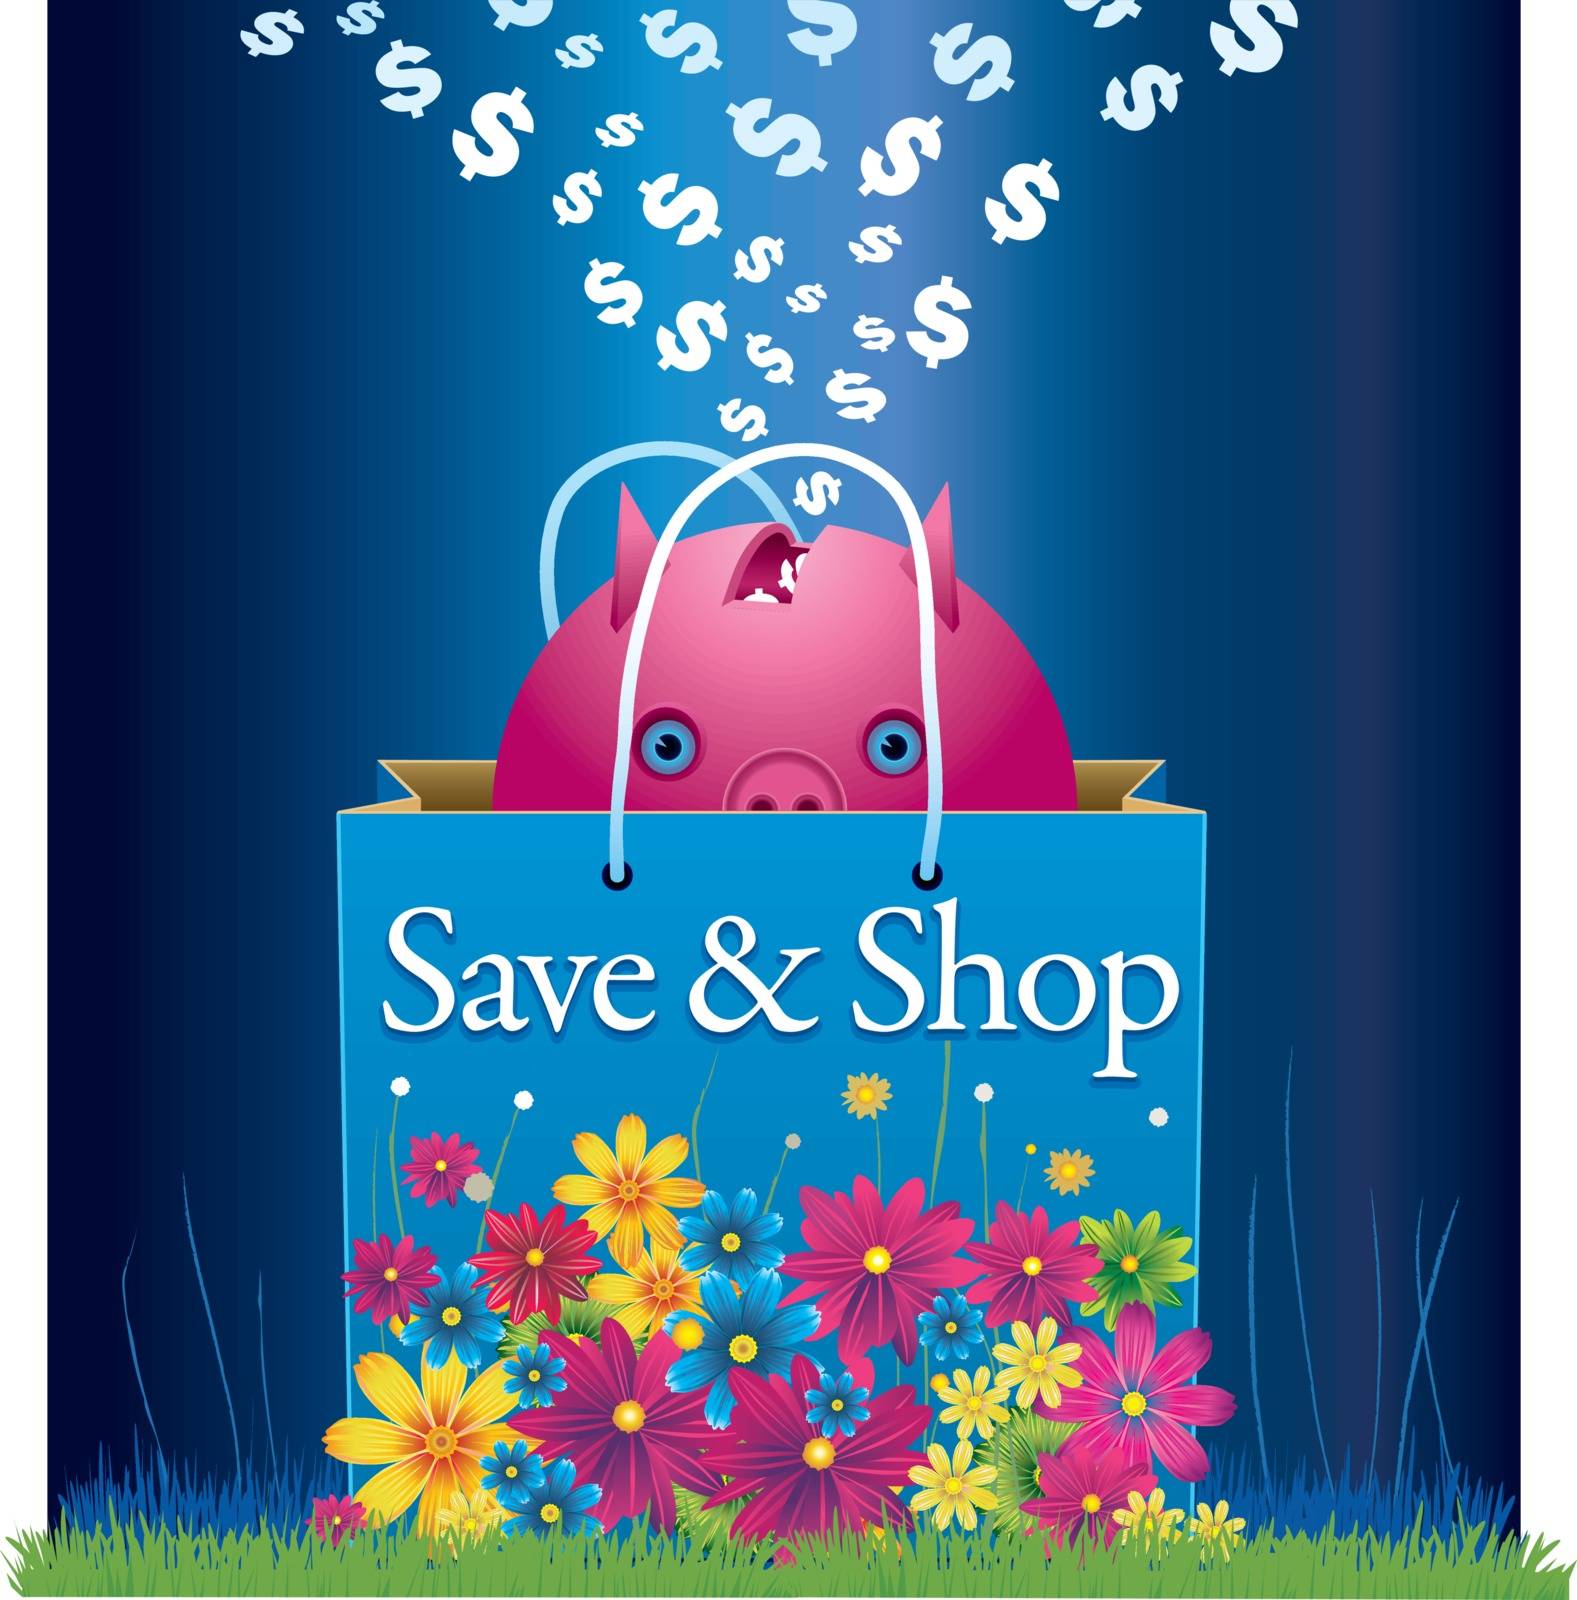 Save and shop by elgusser